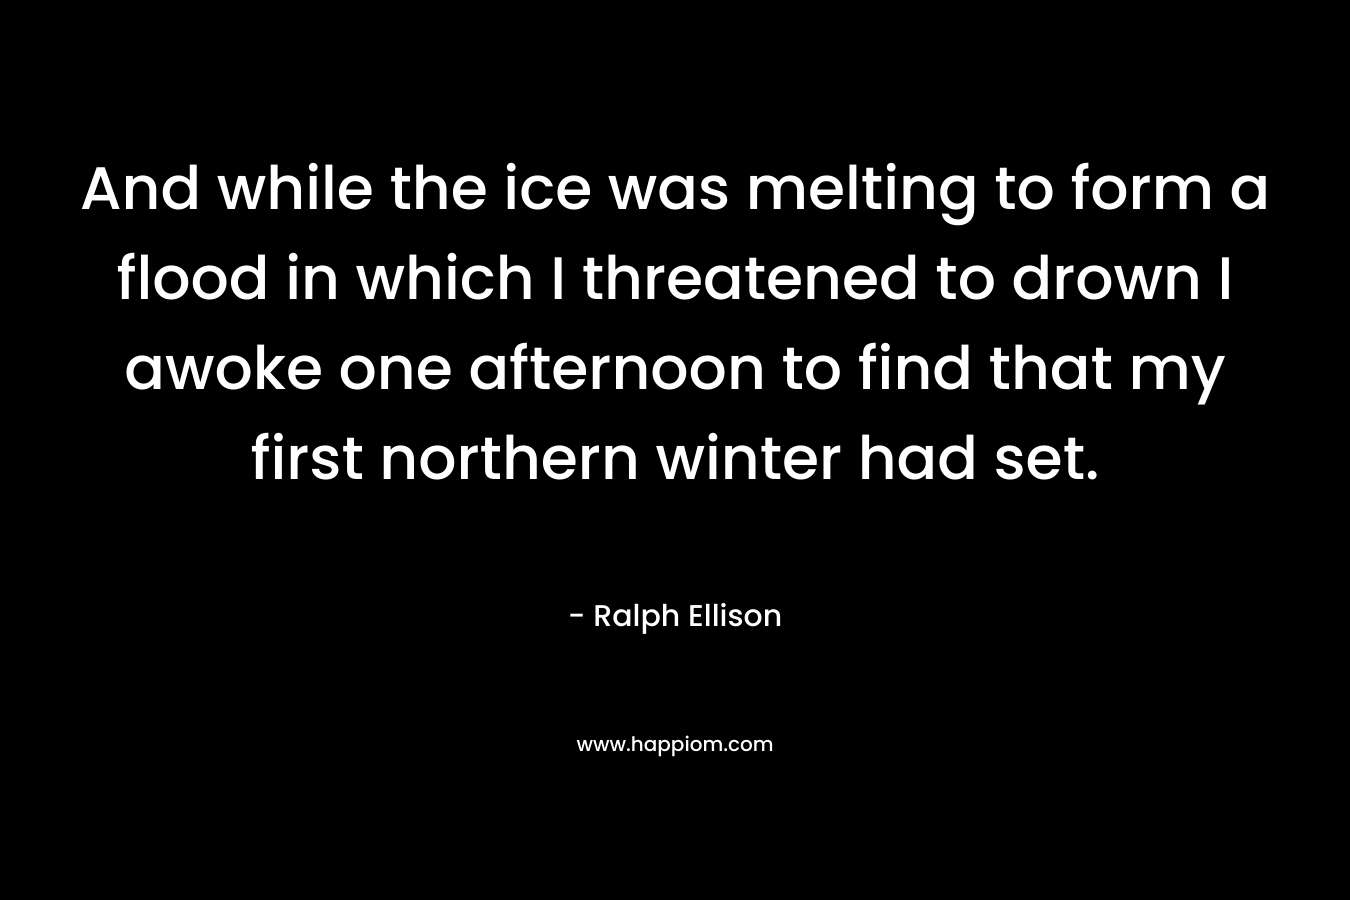 And while the ice was melting to form a flood in which I threatened to drown I awoke one afternoon to find that my first northern winter had set. – Ralph Ellison